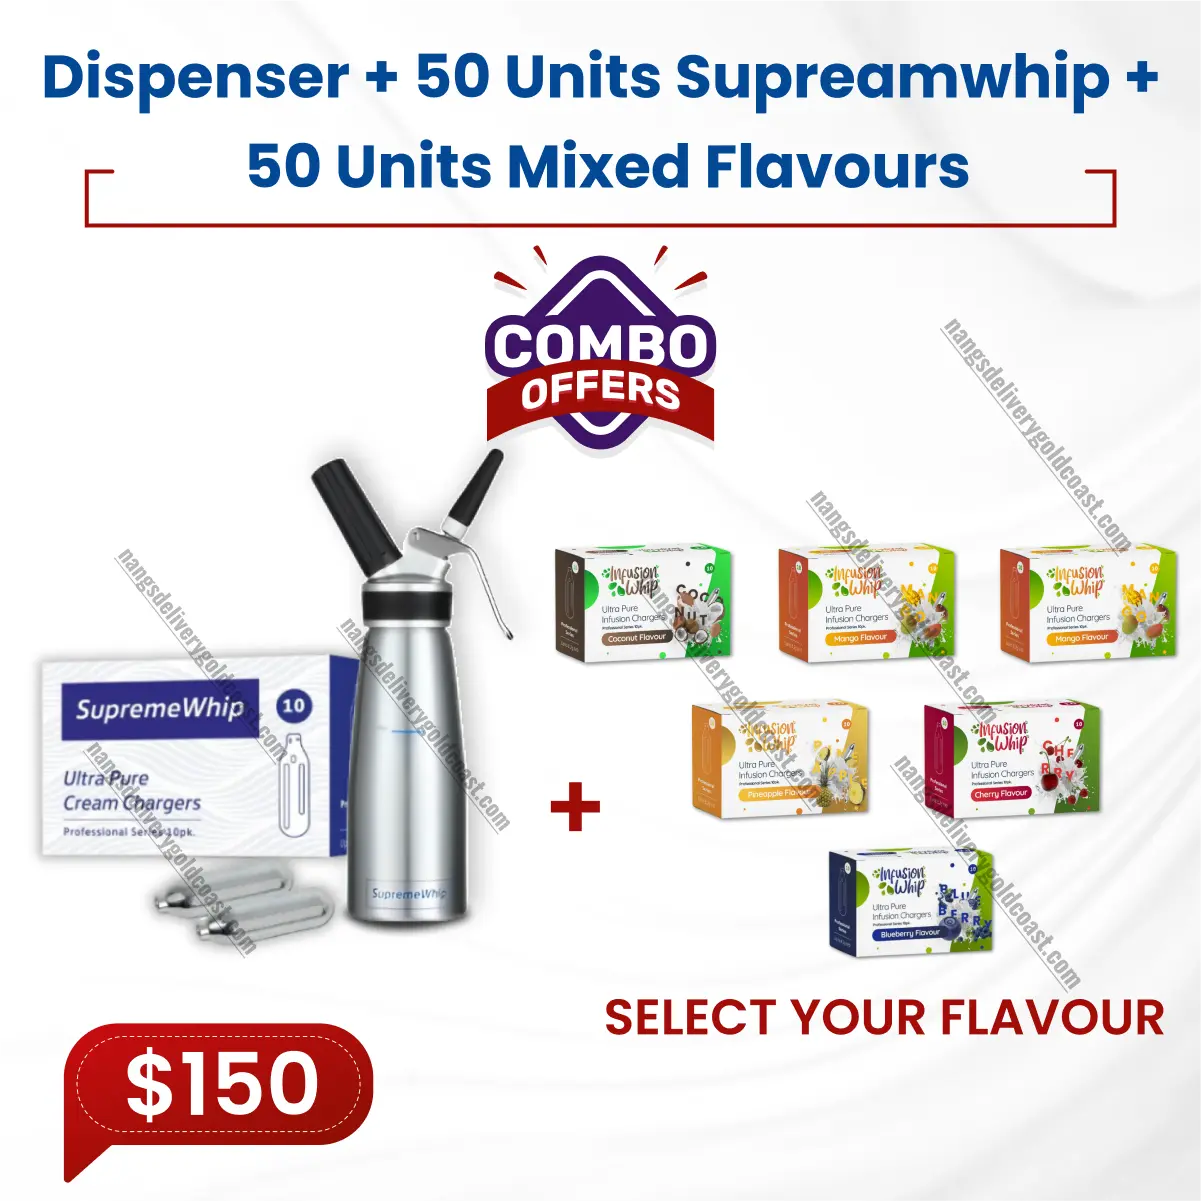 Dispenser + 50 Units Supreamwhip + 50 Units Mixed Flavours